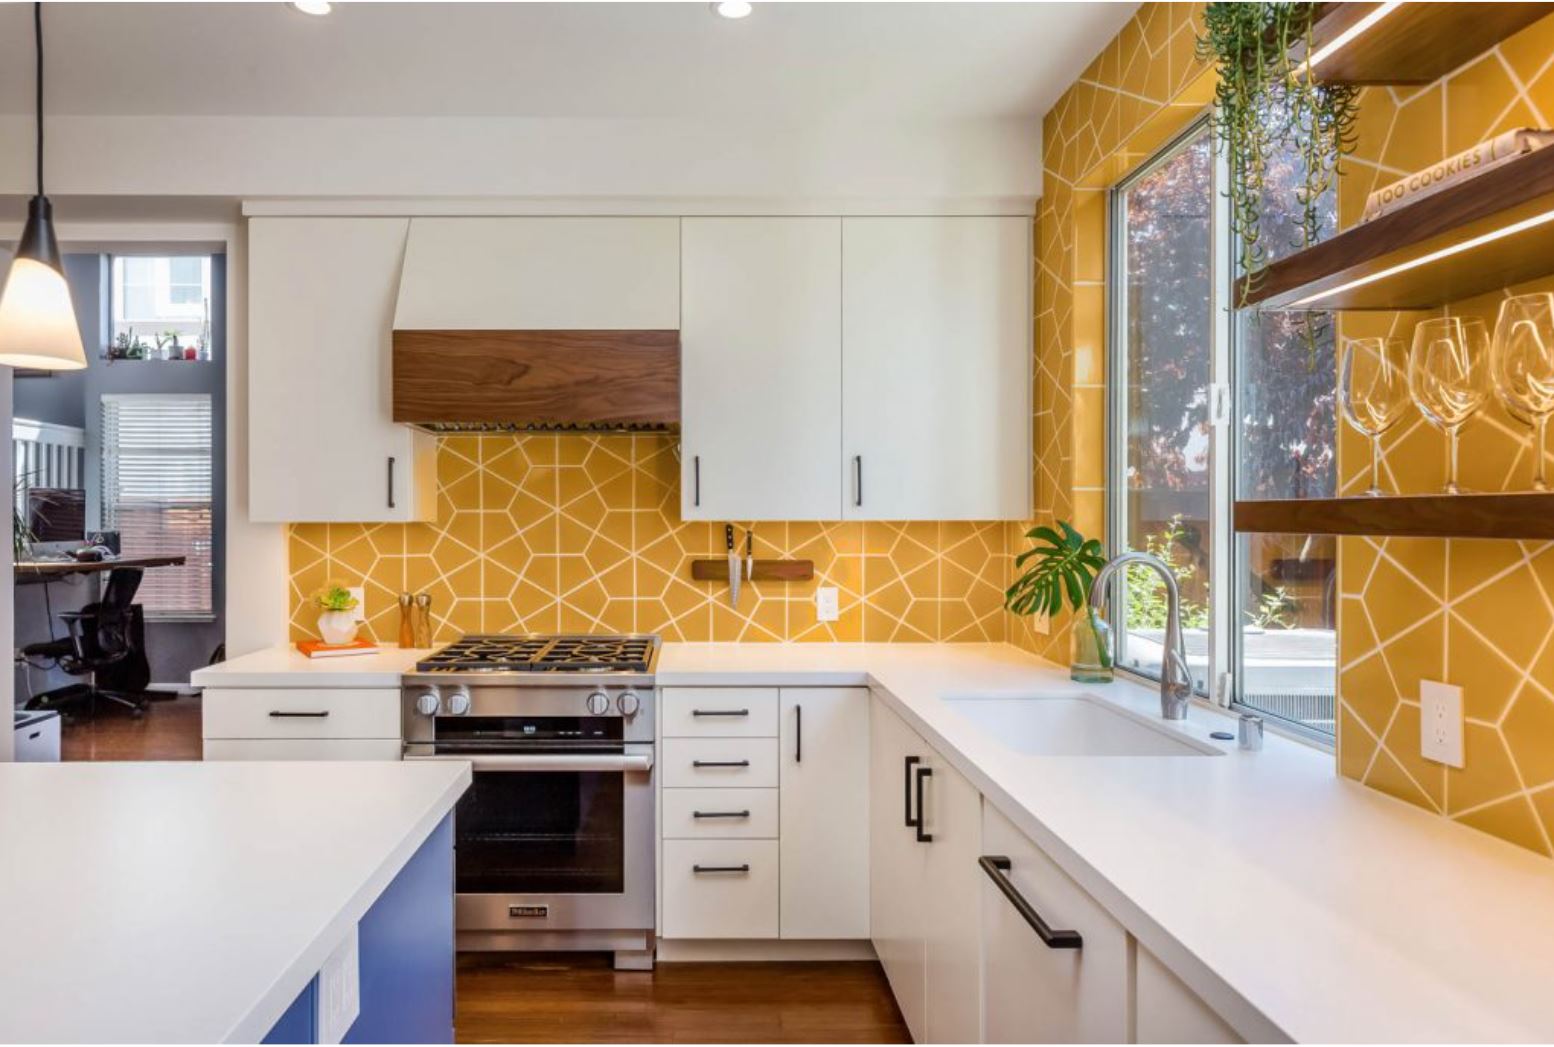 Cheerful Yellow and Blue Kitchen Remodel in Downtown San Jose - Home Remodeling from Next Stage Design